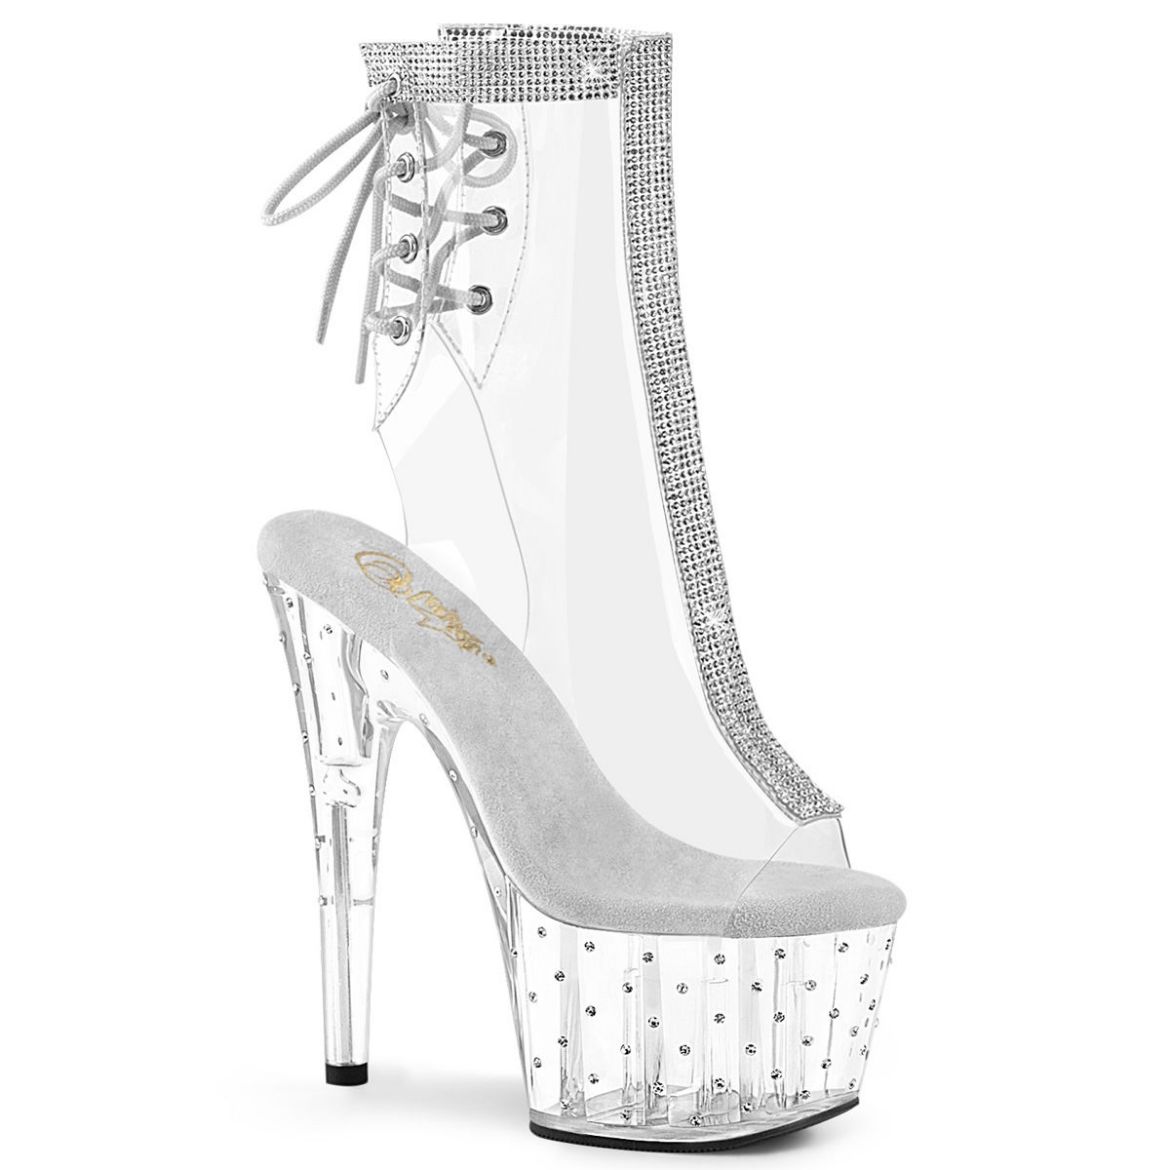 Product image of Pleaser STARDUST-1018C-2RS Clear/Clear 7 inch (17.8 cm) Heel 2 3/4 inch (7 cm) Platform Open Toe/Heel Ankle Boot With Rhinestones